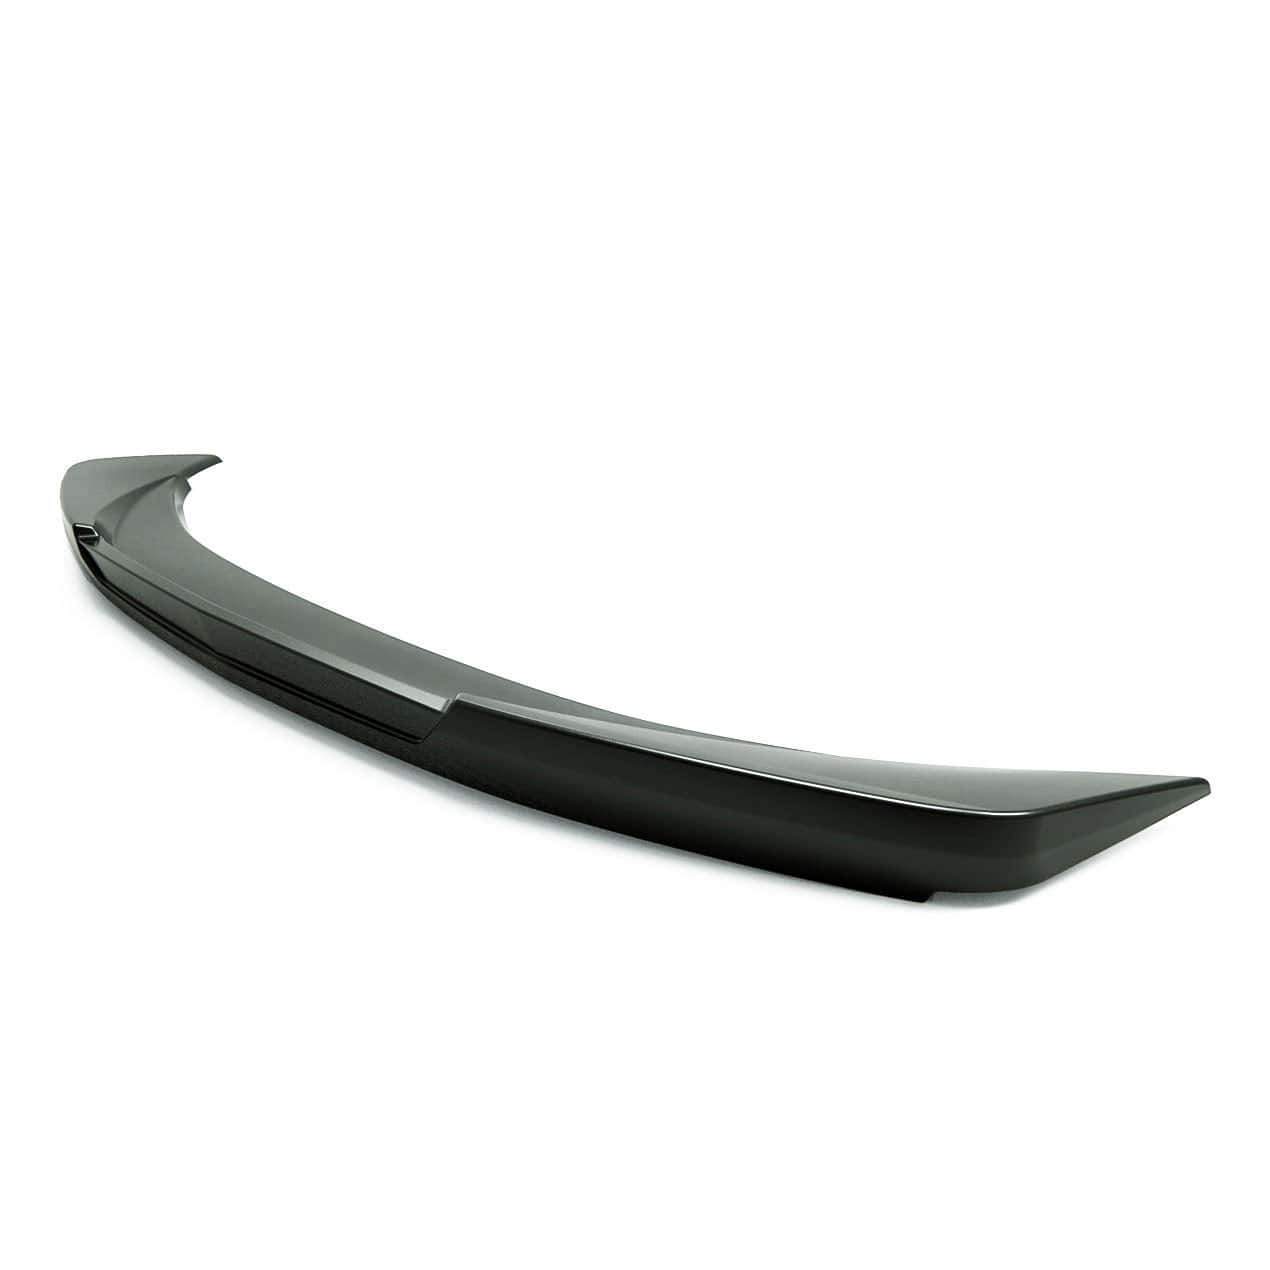 ACS Composite Rear Deck Spoiler for Camaro V6 & I4 [48-4-015]PRM - Enhances down-force and complements the sophisticated lines of the 6th gen Camaro. Direct bolt-on installation.